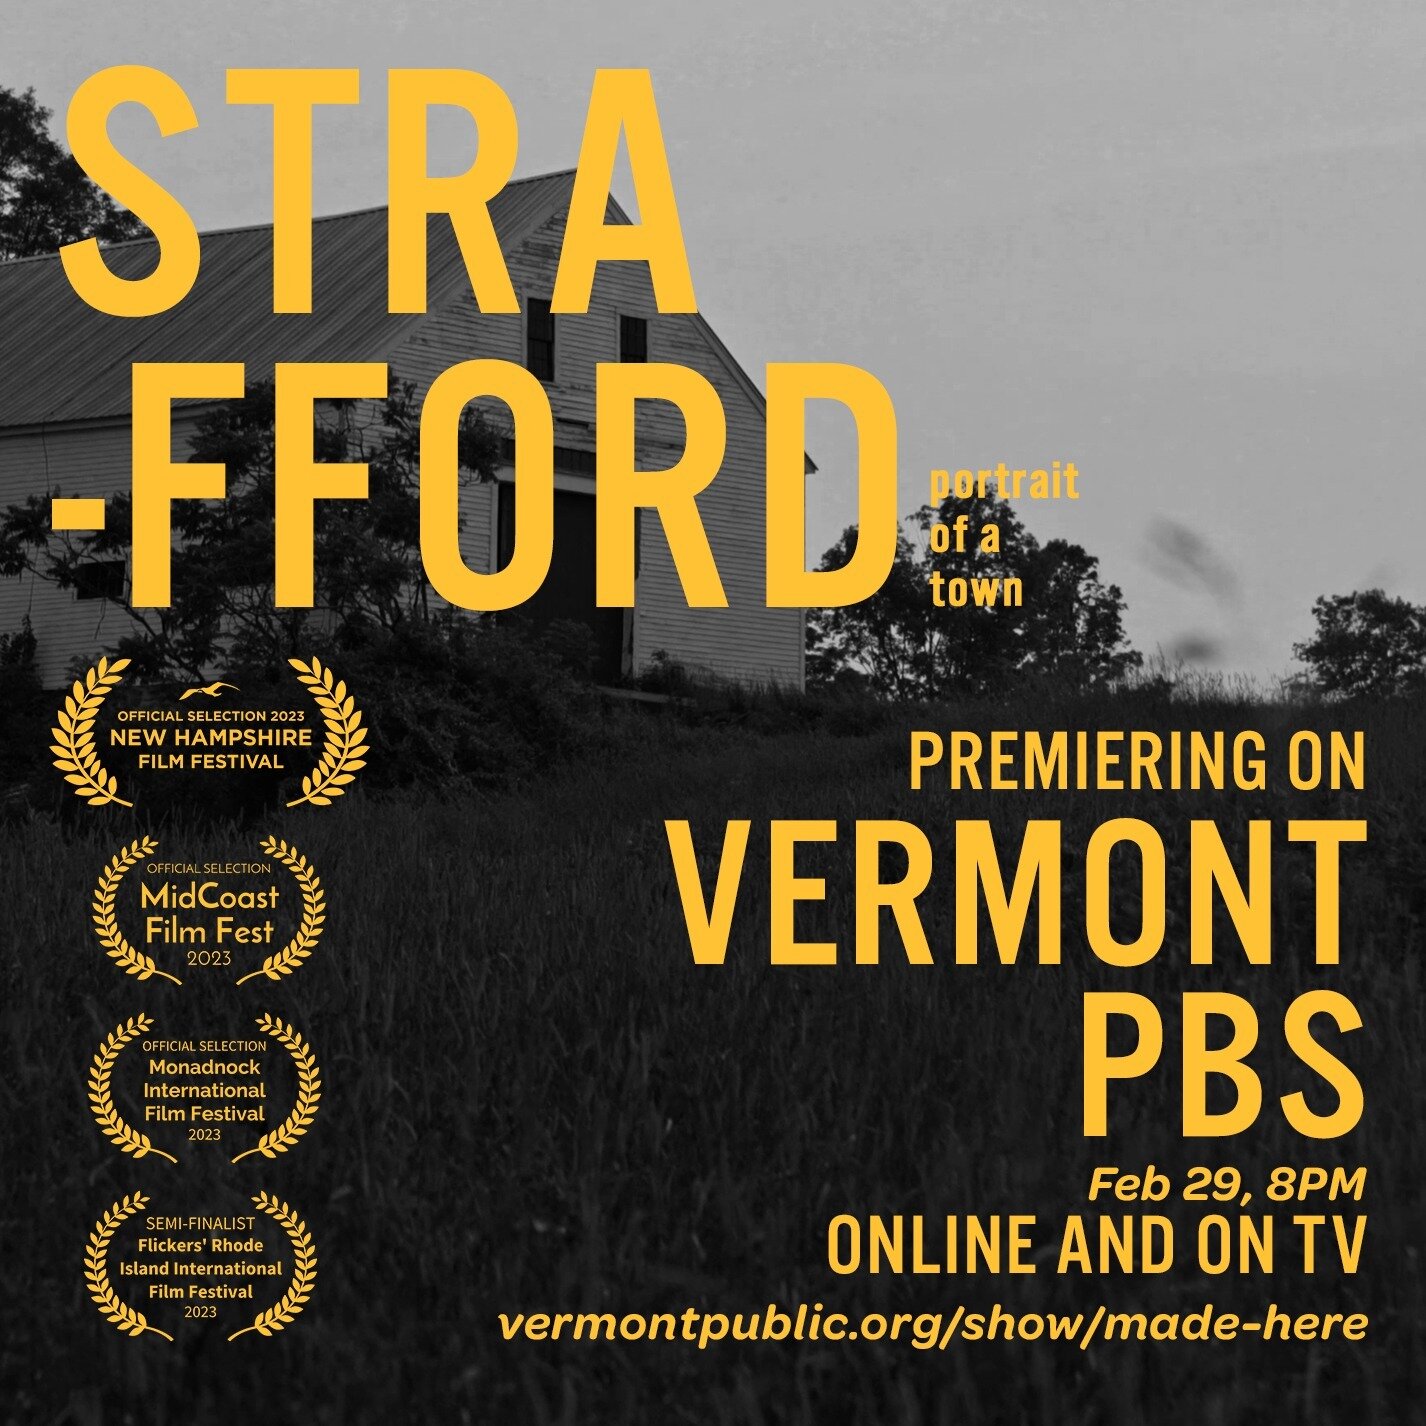 Tomorrow is the big day! Our film Strafford is finally premiering on @vermontpbs, on TV and online! It's been an incredible project for us, and stirs so many emotions whenever we get the chance to watch it again. We hope you get a chance to check it 